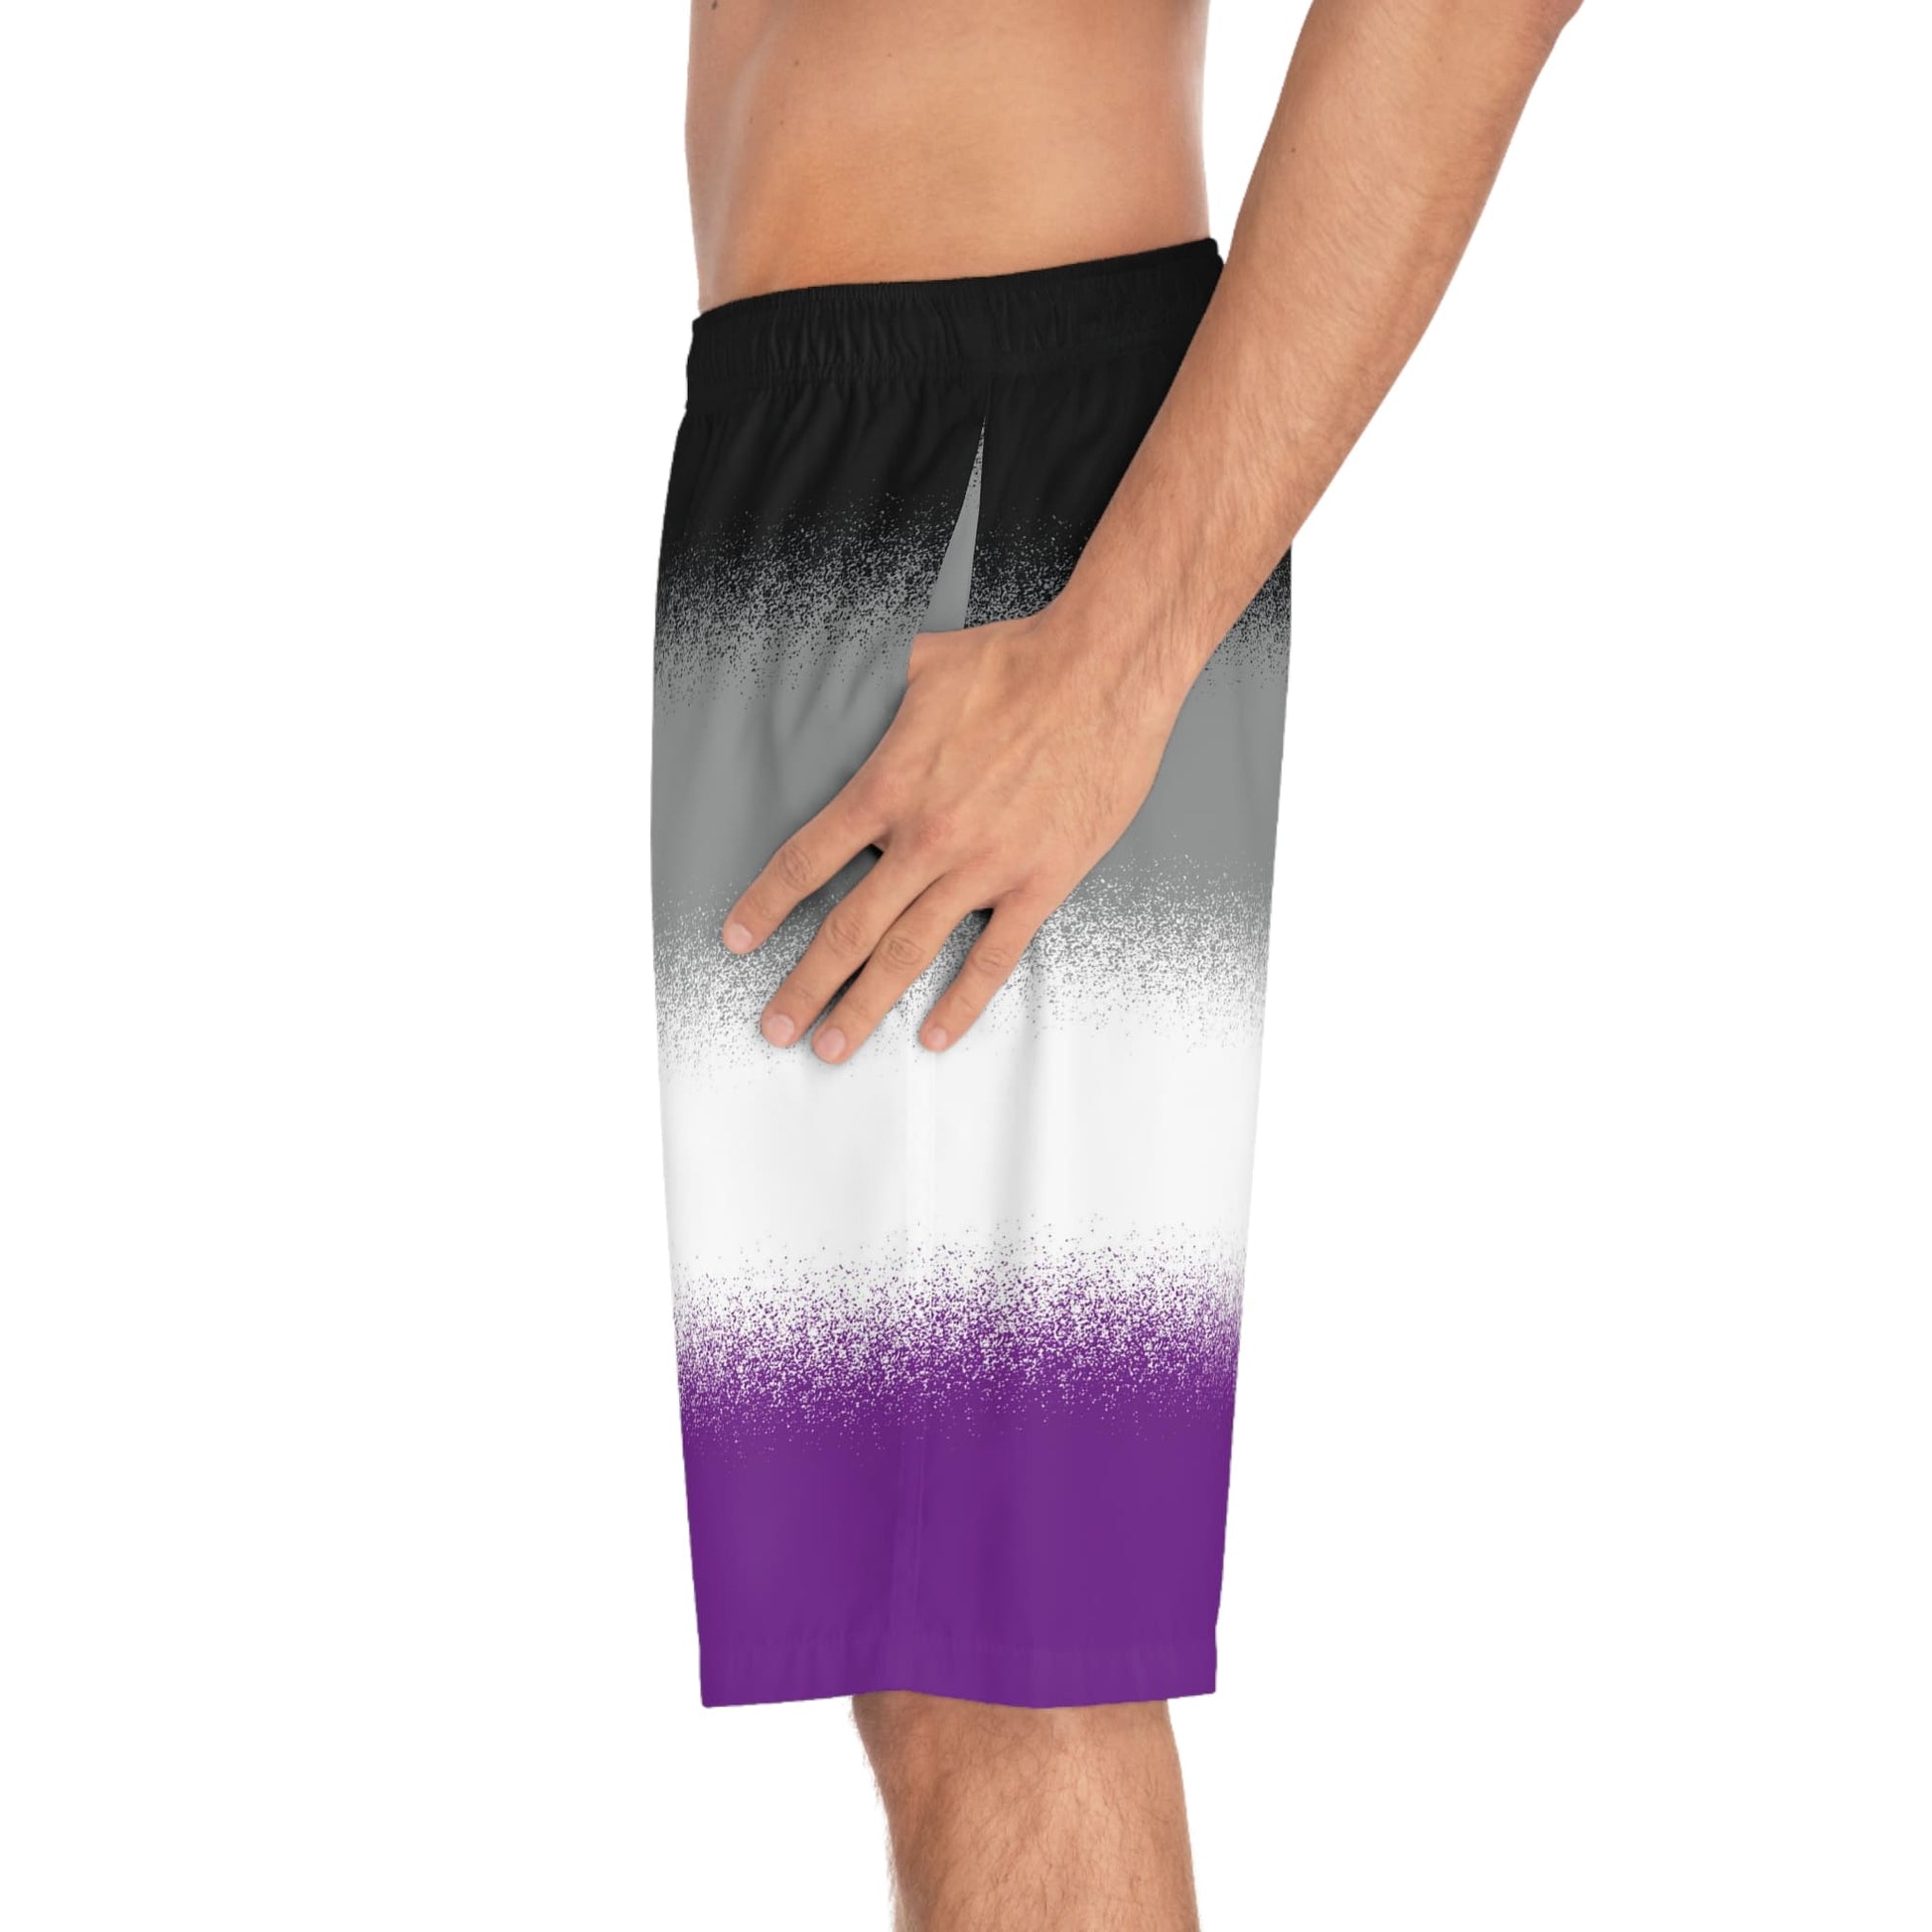 asexual swim shorts, right